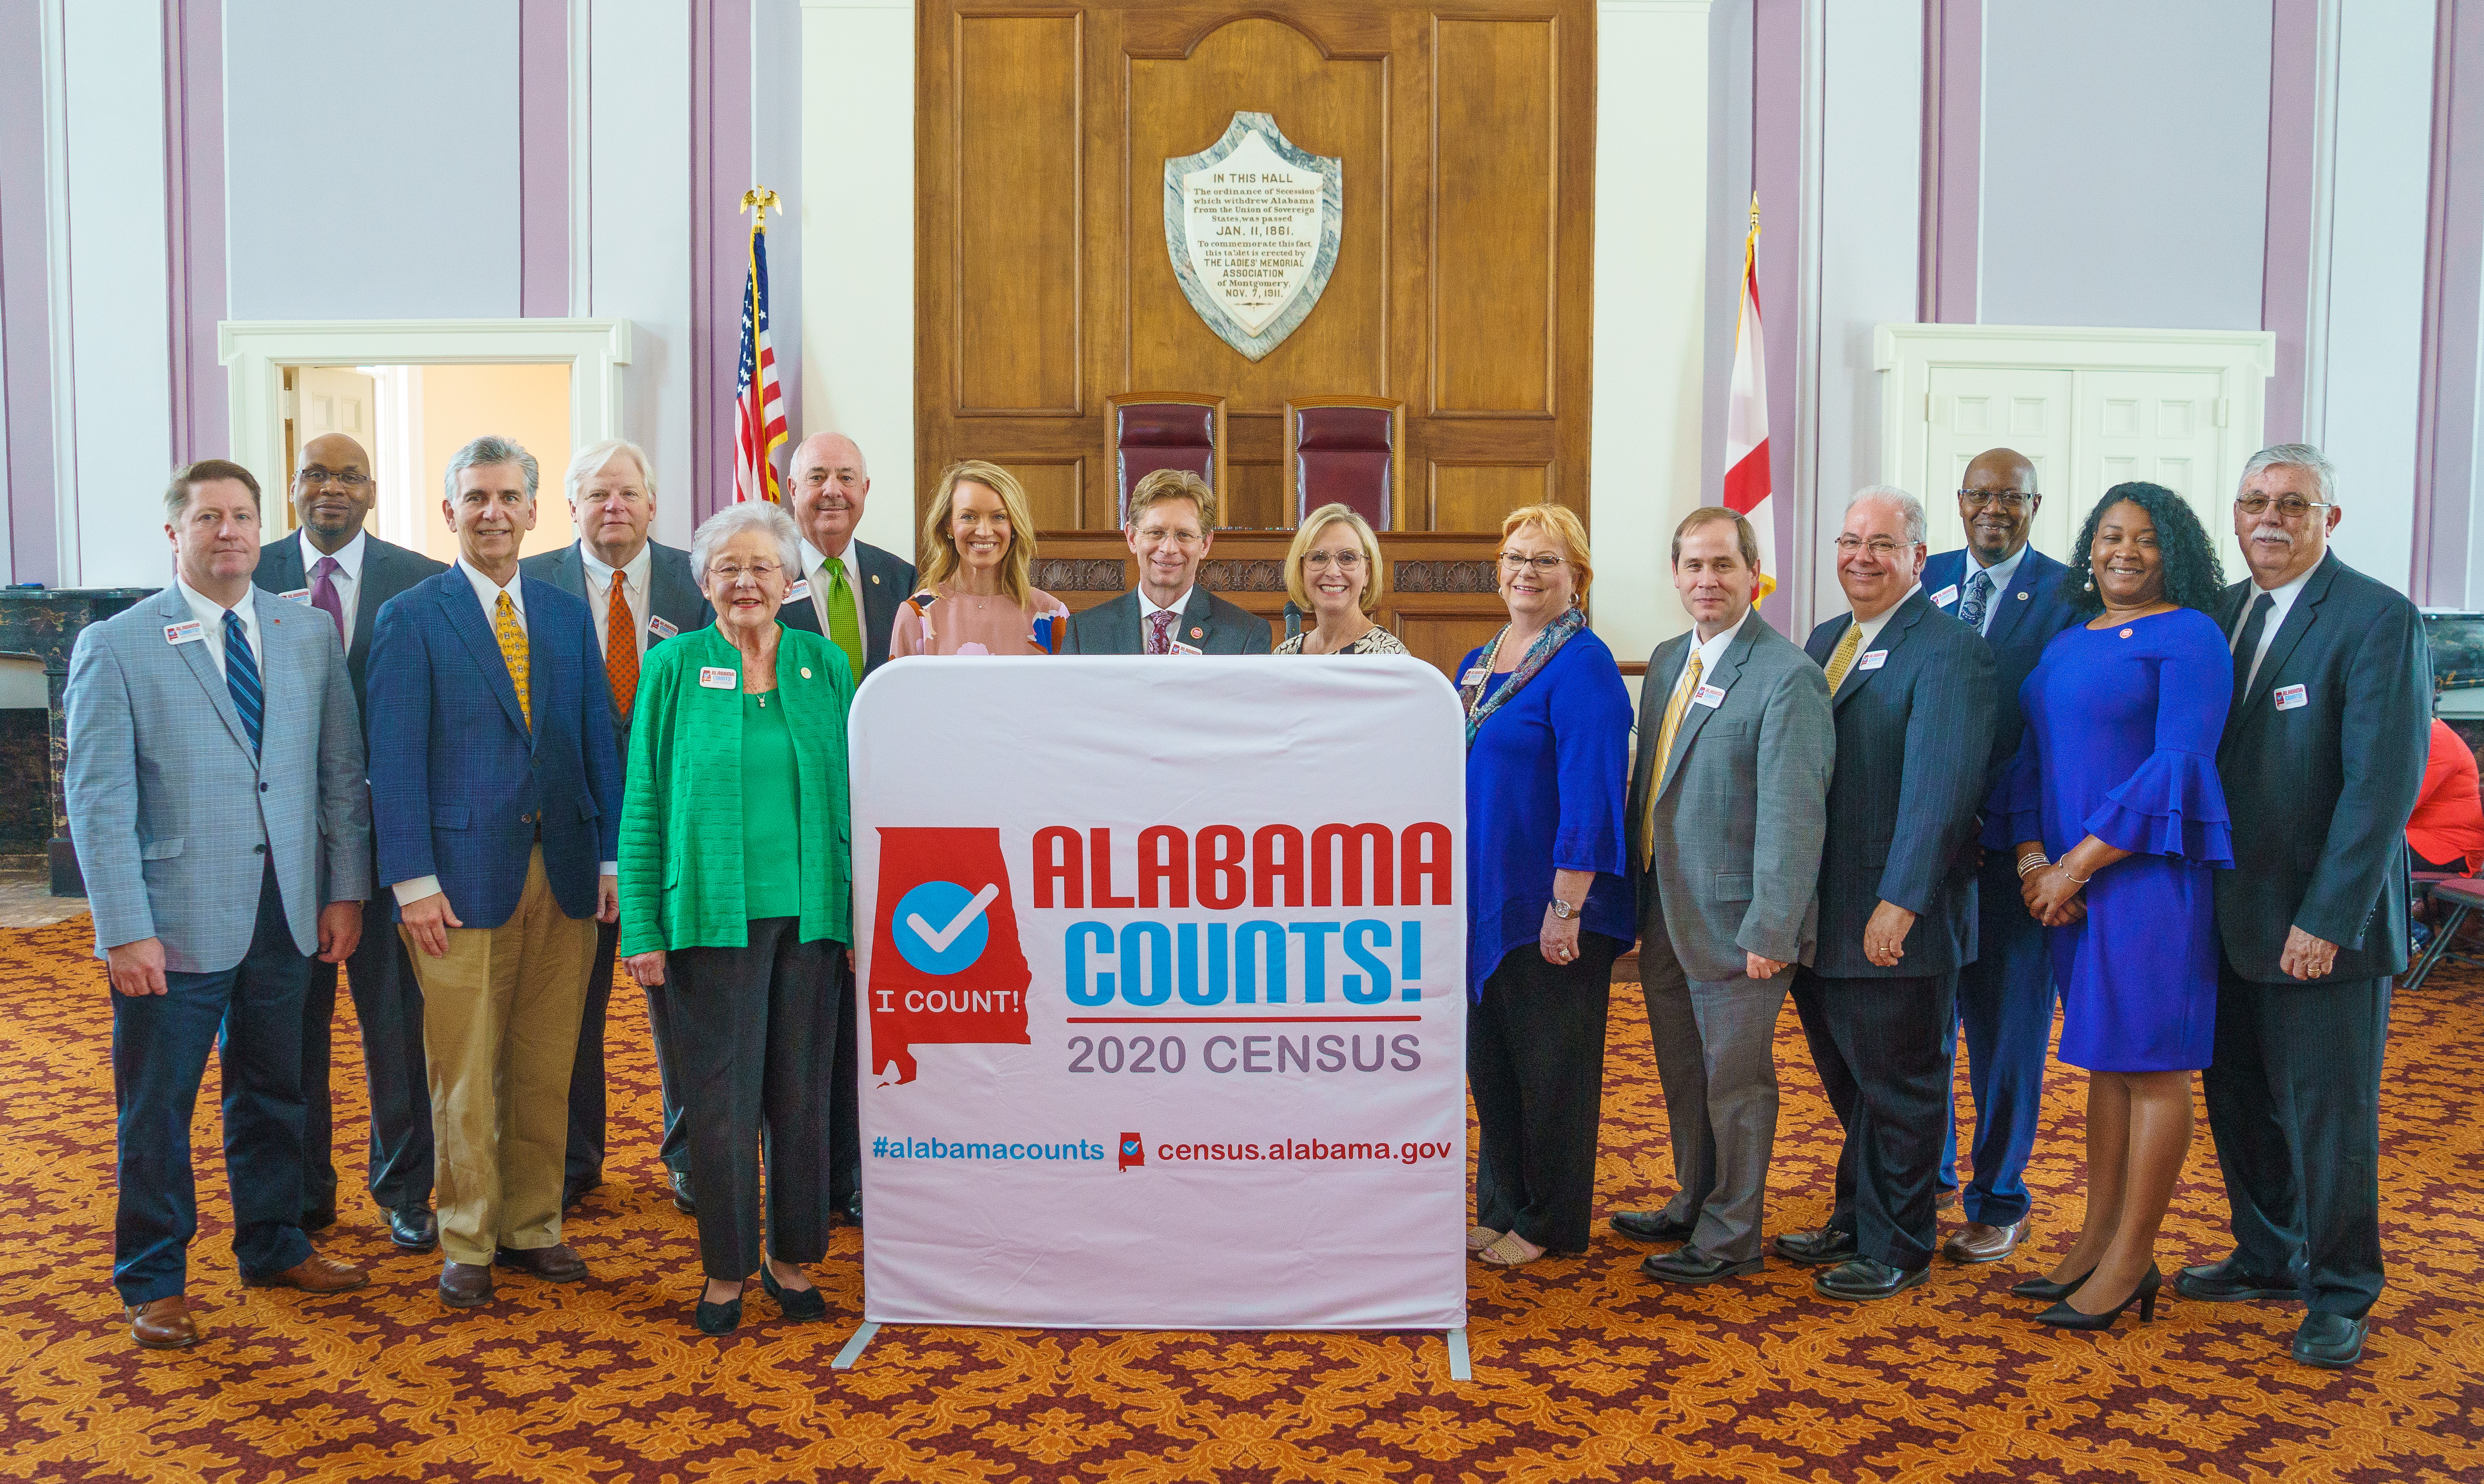 Governor Ivey Kicks Off Year-Long Alabama Counts 2020 Census Initiative